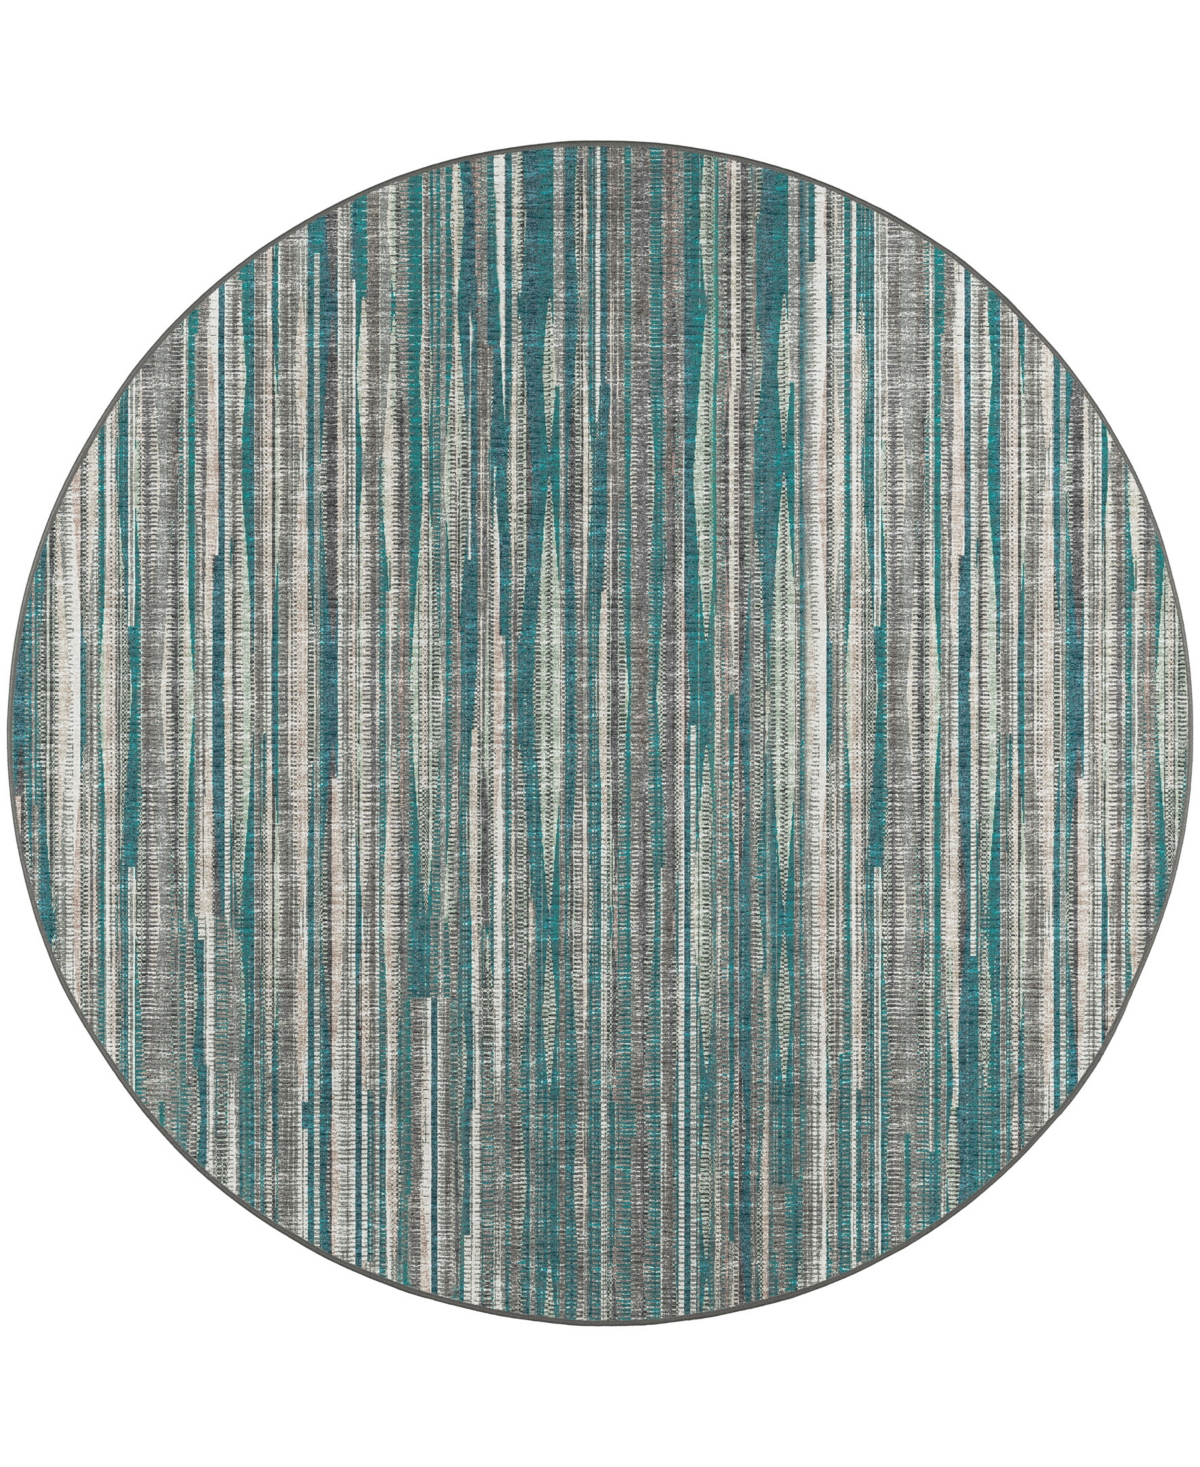 D Style Sutter Stt-1 6' X 6' Round Area Rug In Teal